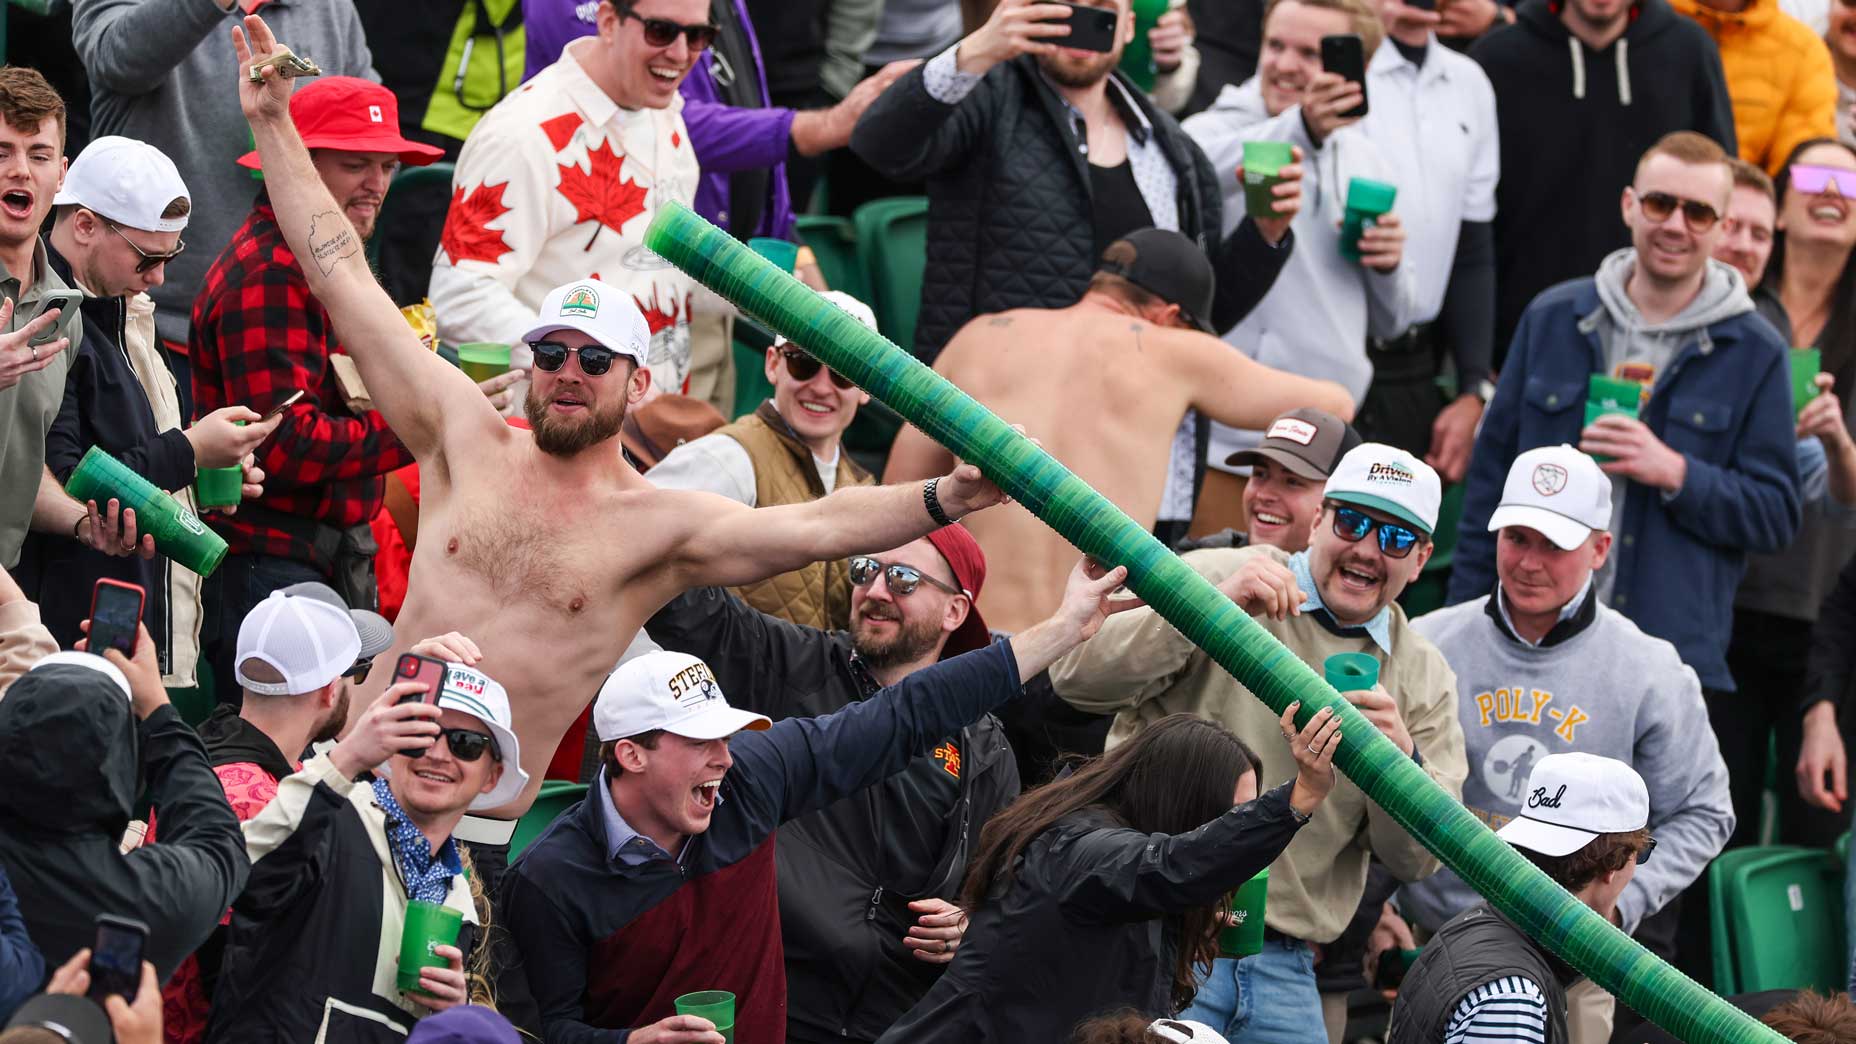 Fans make a beer snake at the WM Phoenix Open.